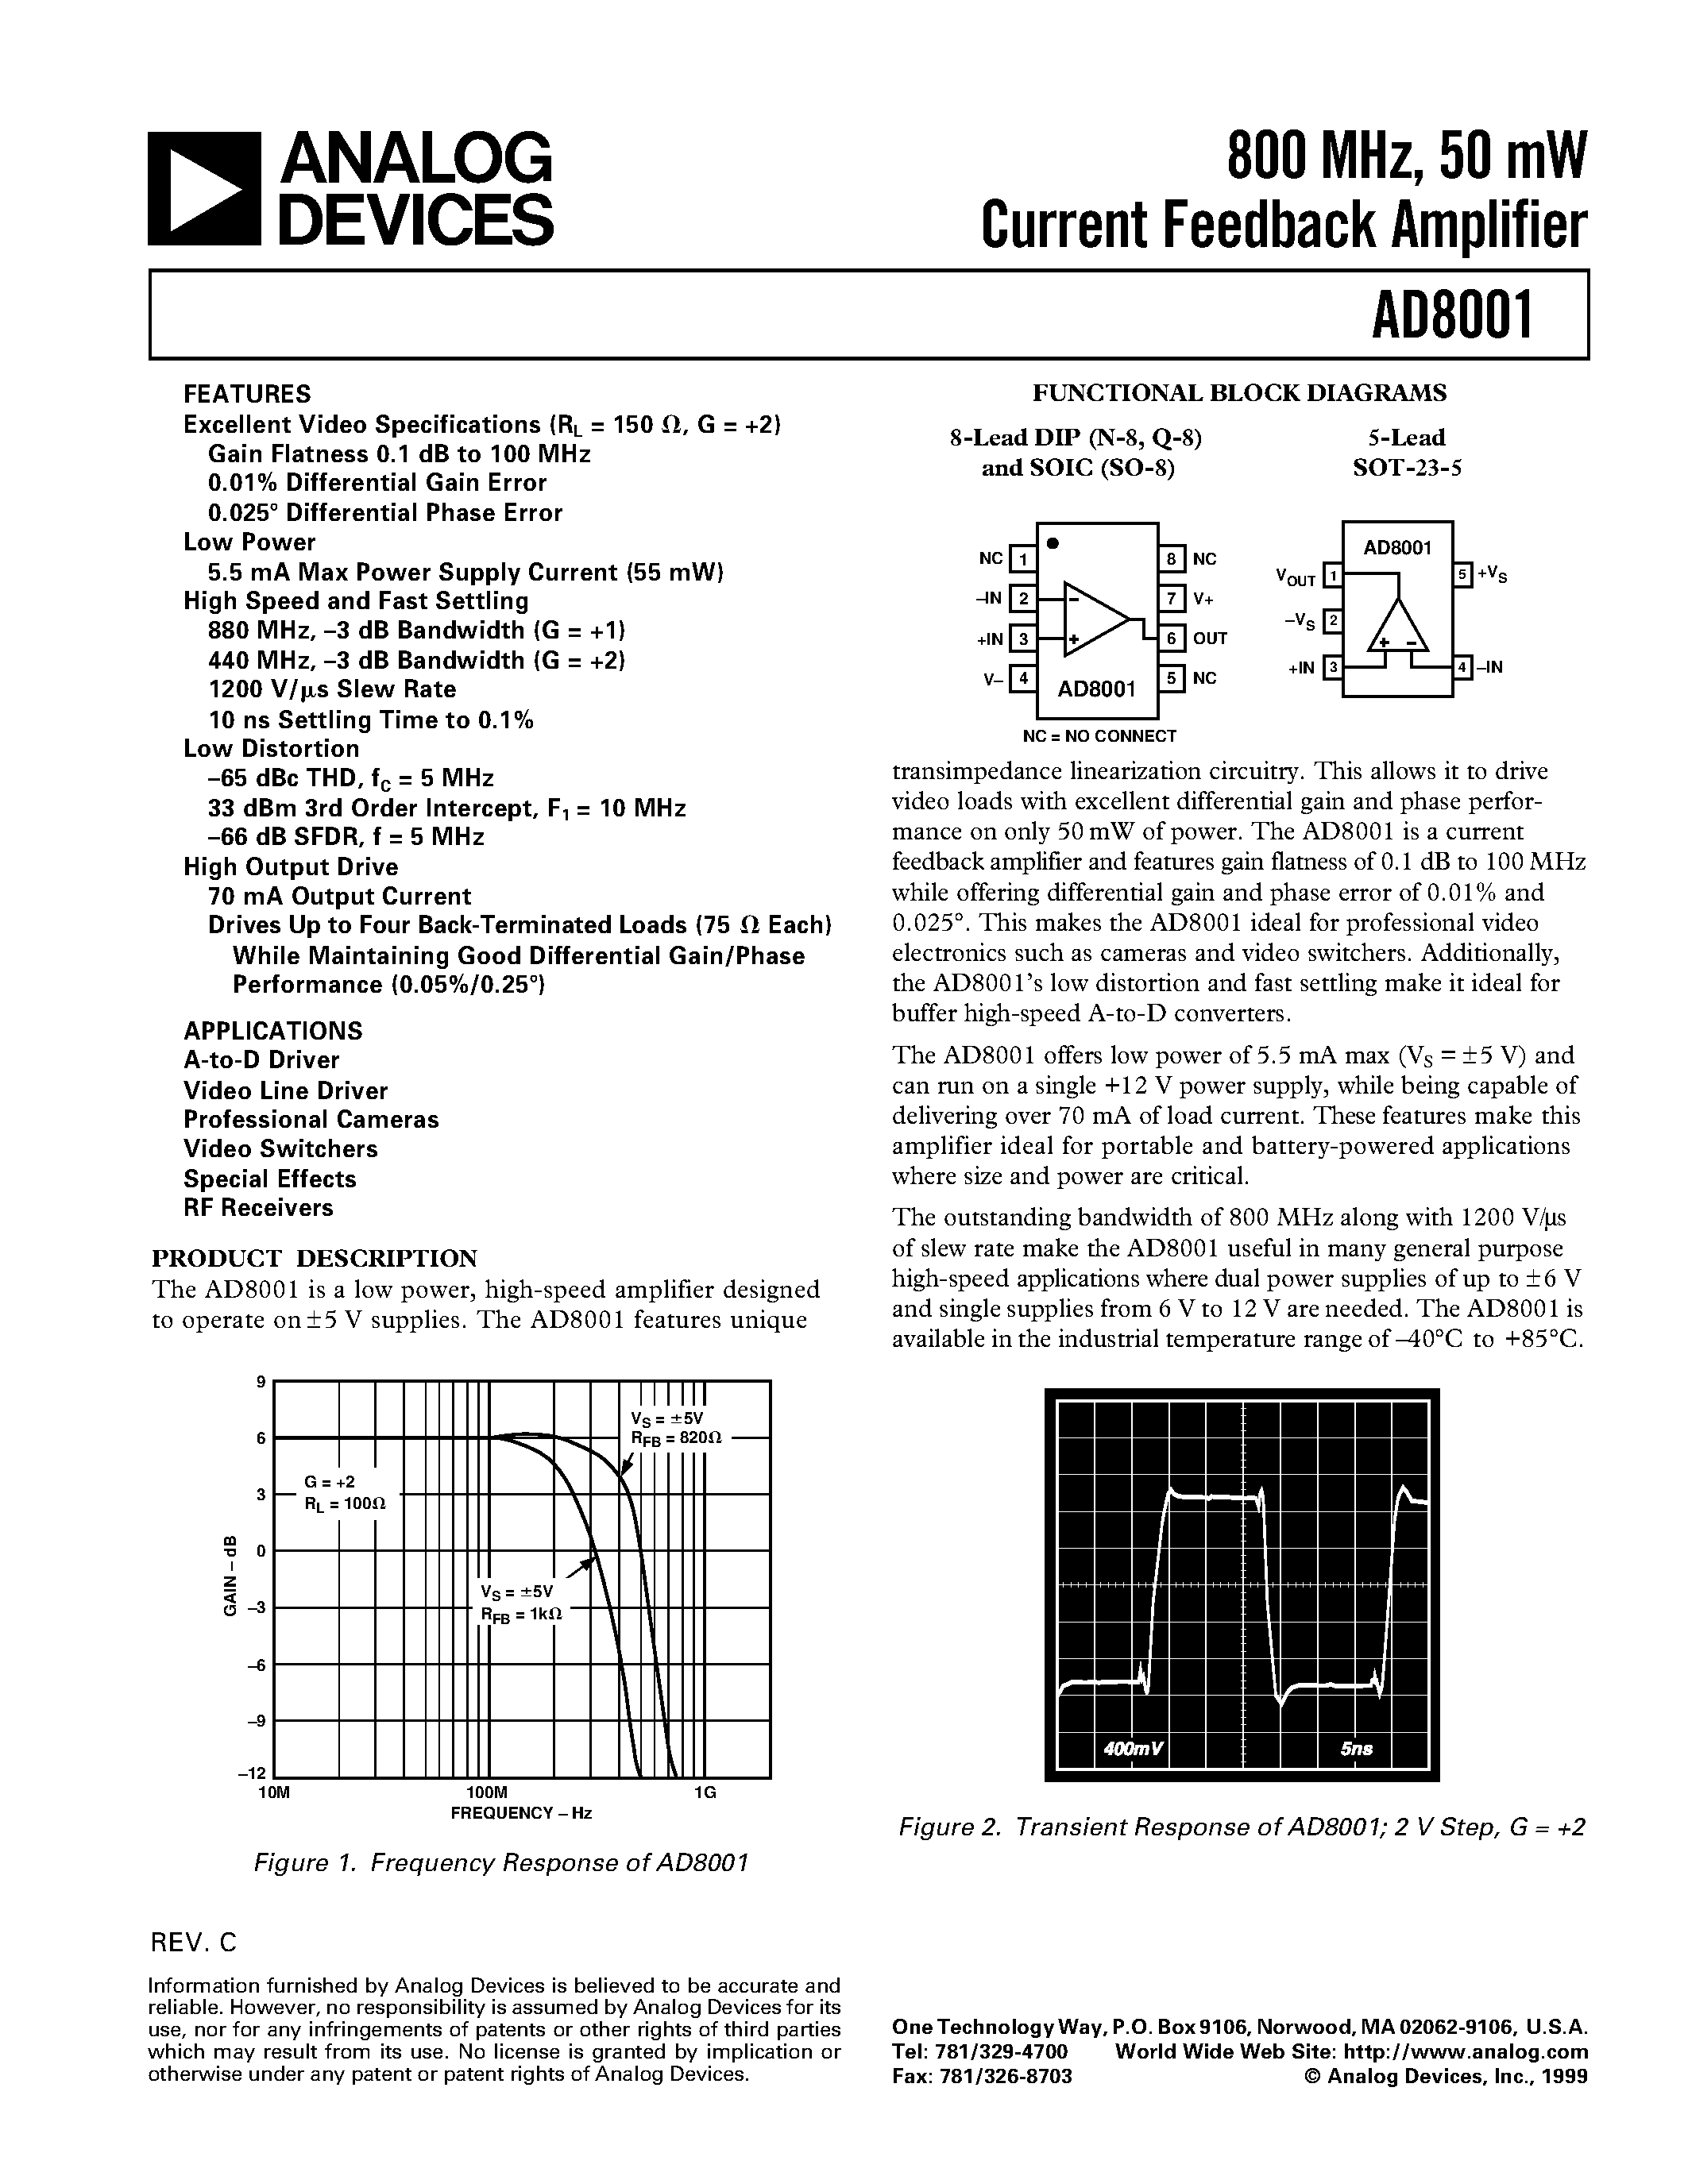 Datasheet AD8001ACHIPS - 800 MHz/ 50 mW Current Feedback Amplifier page 1